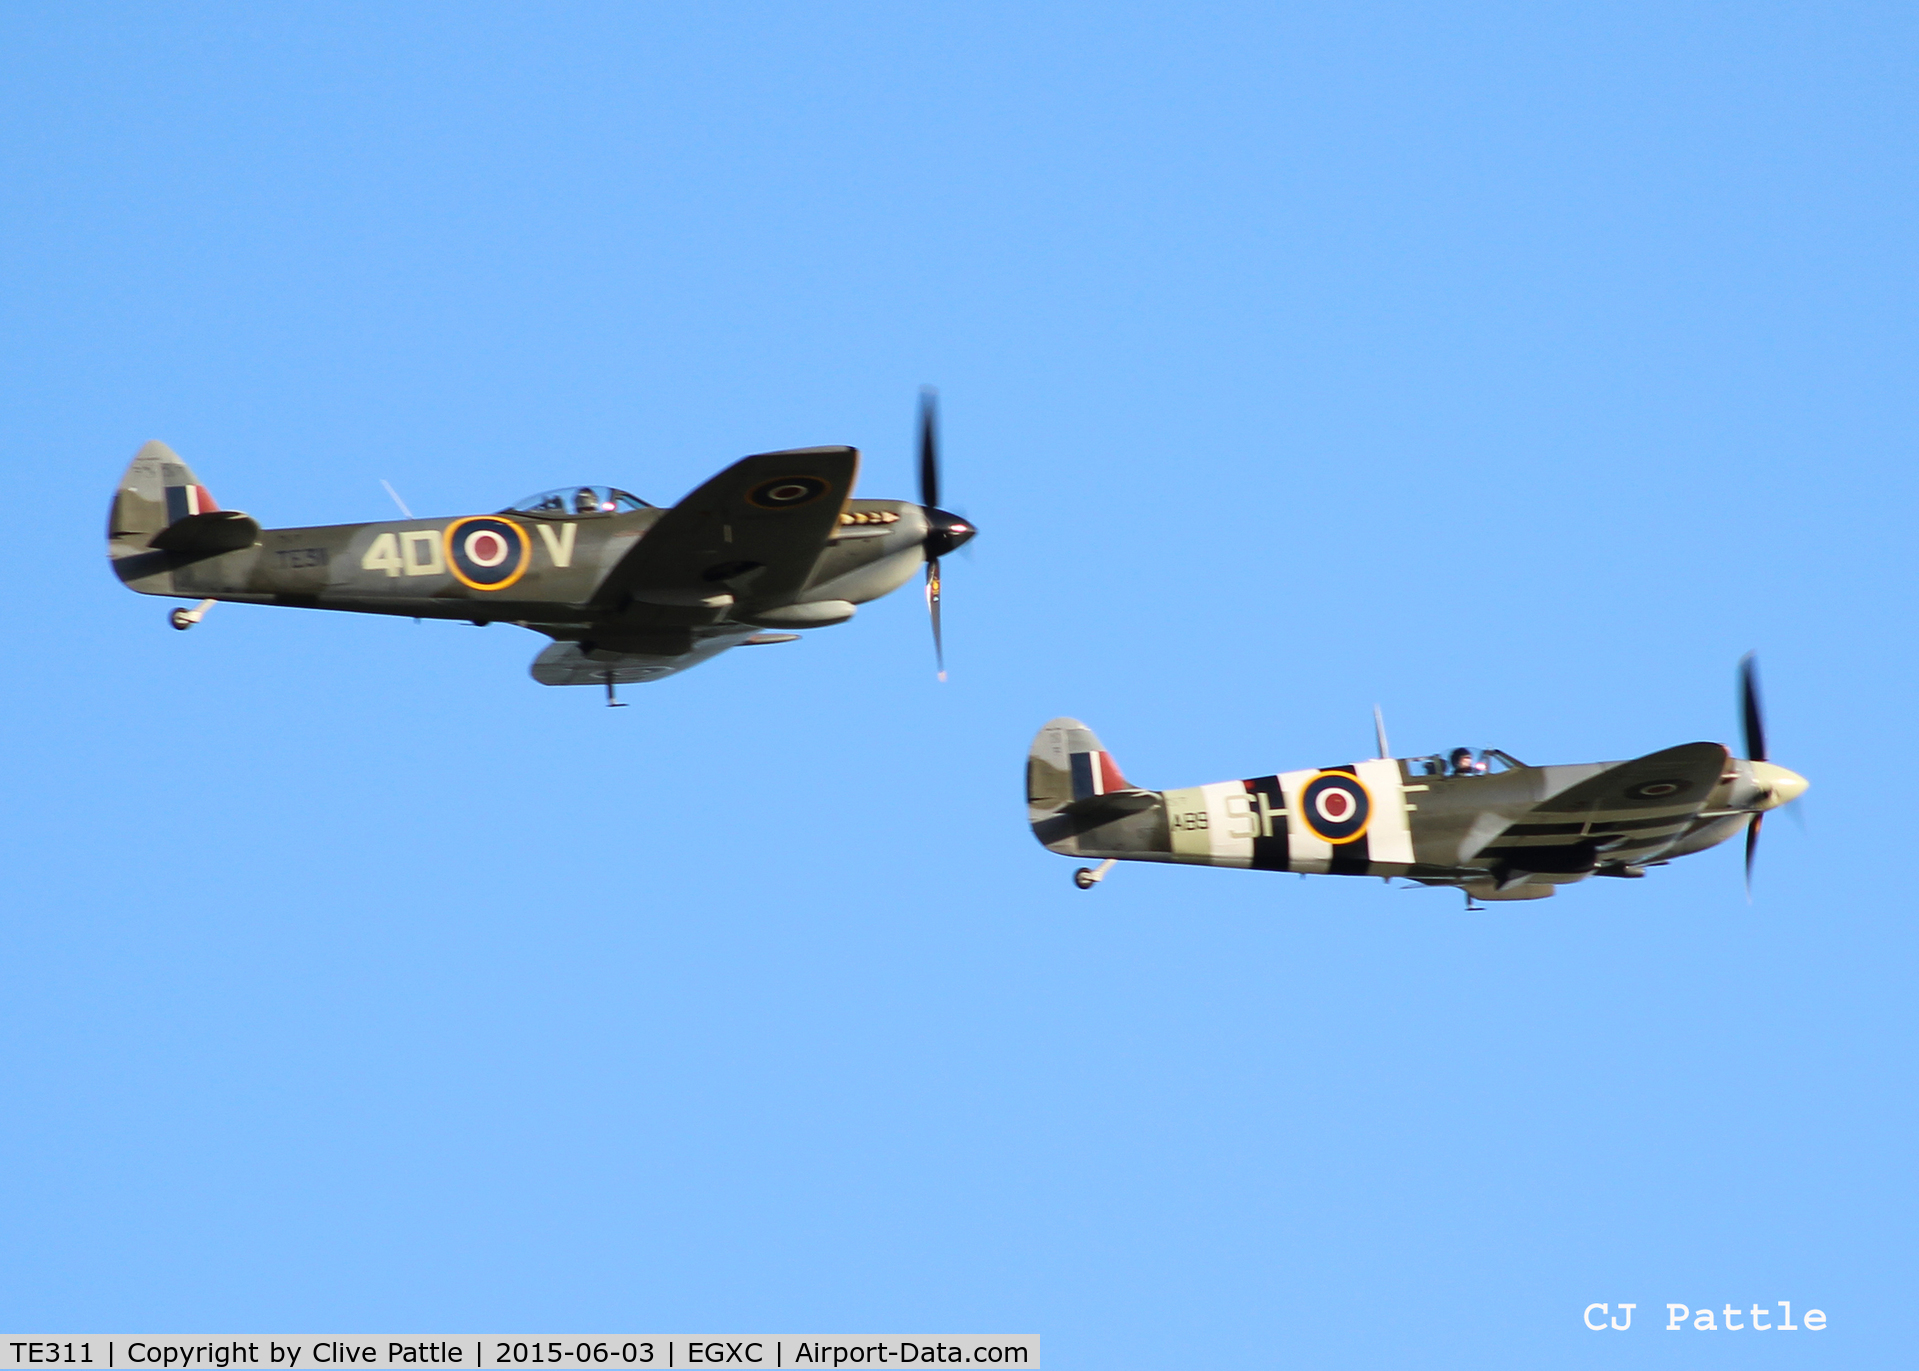 TE311, 1945 Supermarine 361 Spitfire LF.XVIe C/N CBAF.IX.4497, Seen in an evening formation takeoff from its home base at RAF Coningsby EGXC is TE311 (on left) and AB910 both of the RAF BBMF